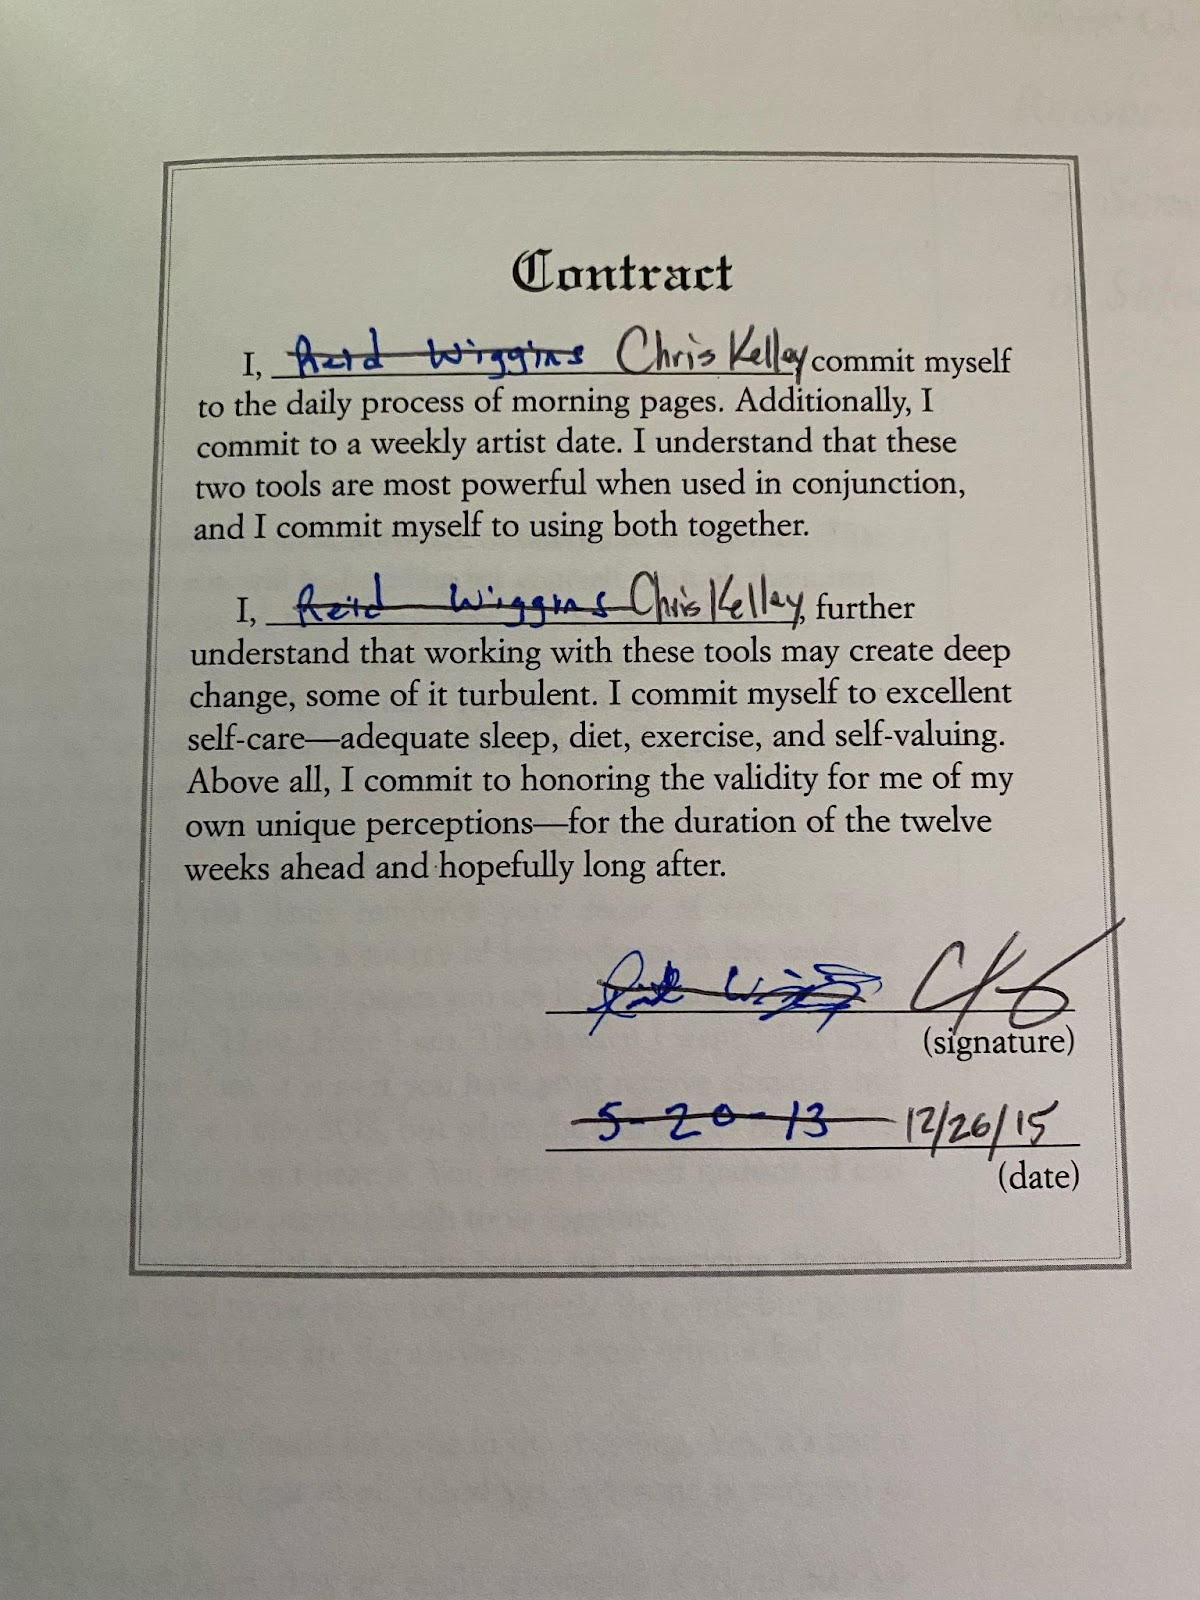 Artist's Way Contract signed by Chris Kelley